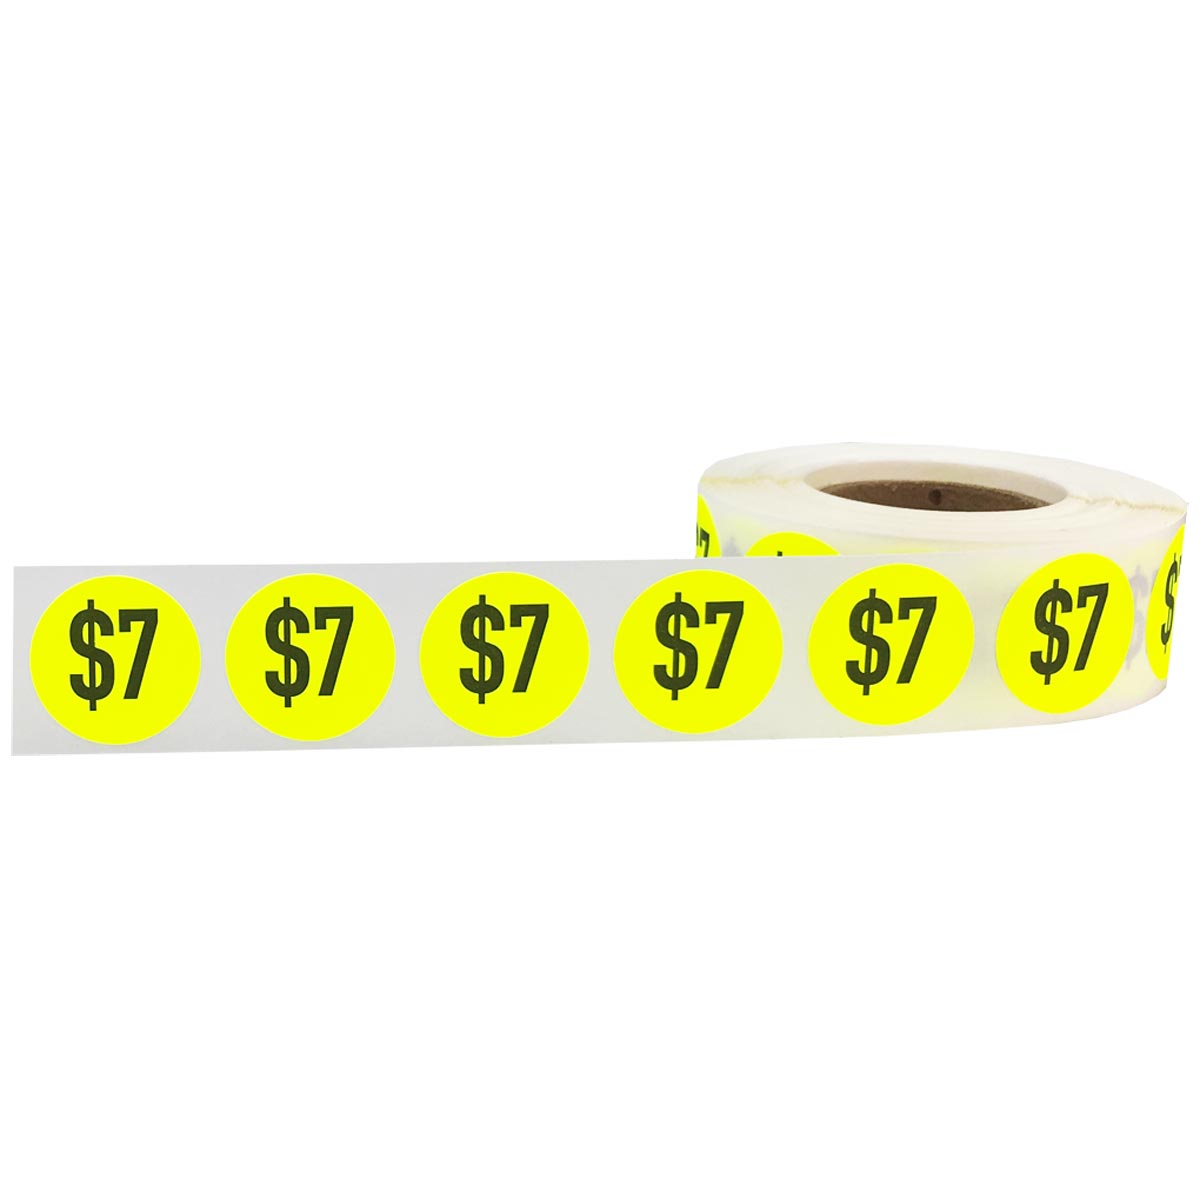 Fluorescent Red $7.99 Pricing Stickers 3/4 Round